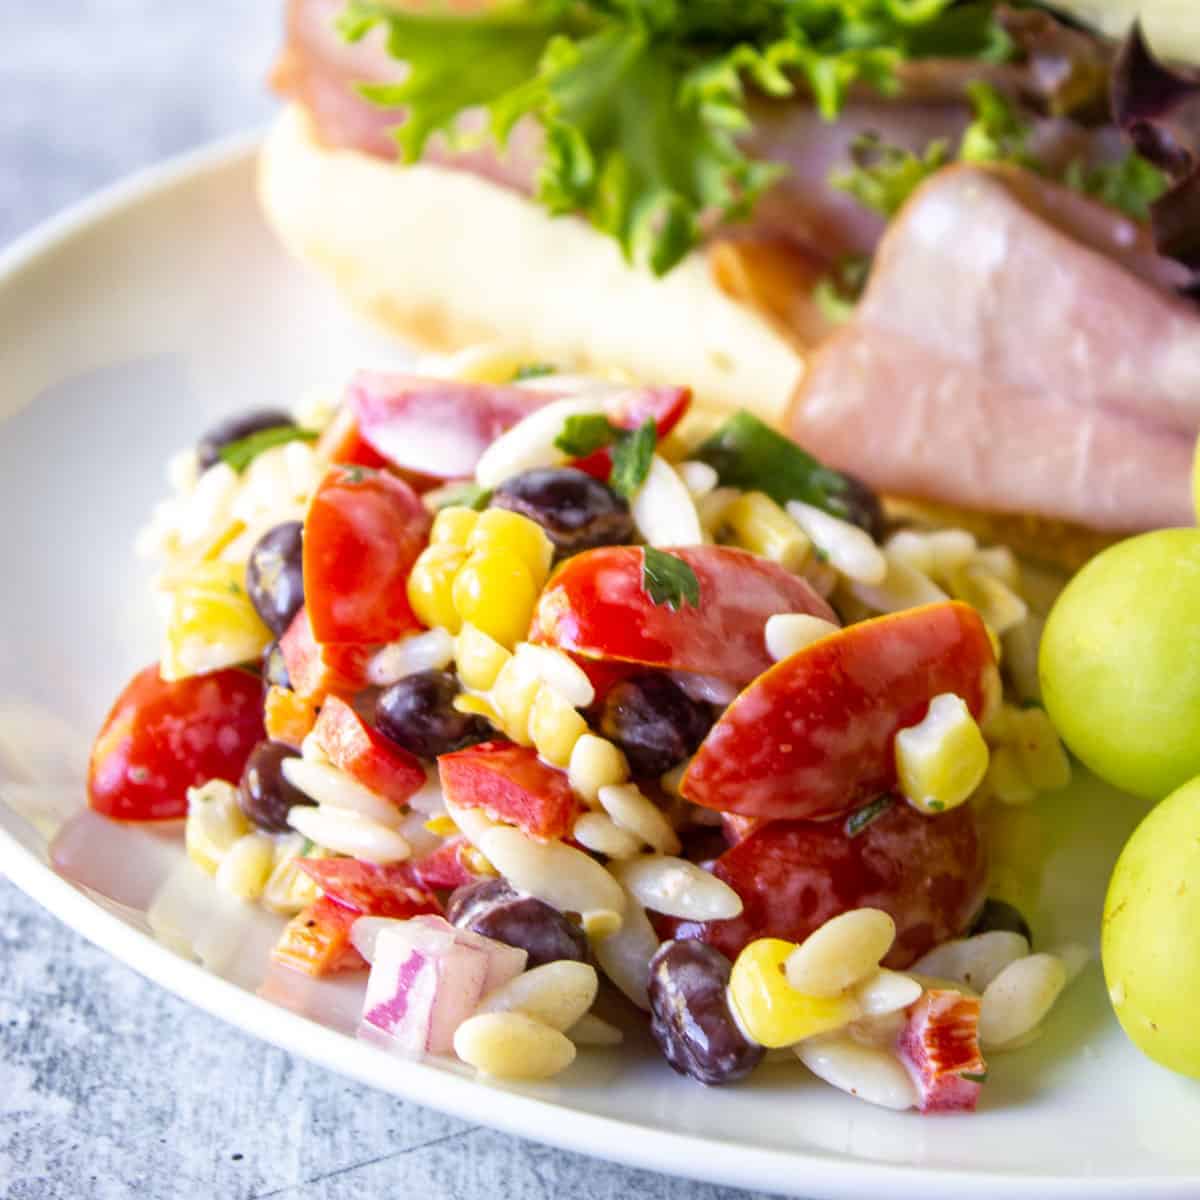 Orzo pasta salad on a white plate with a sandwich and grapes.